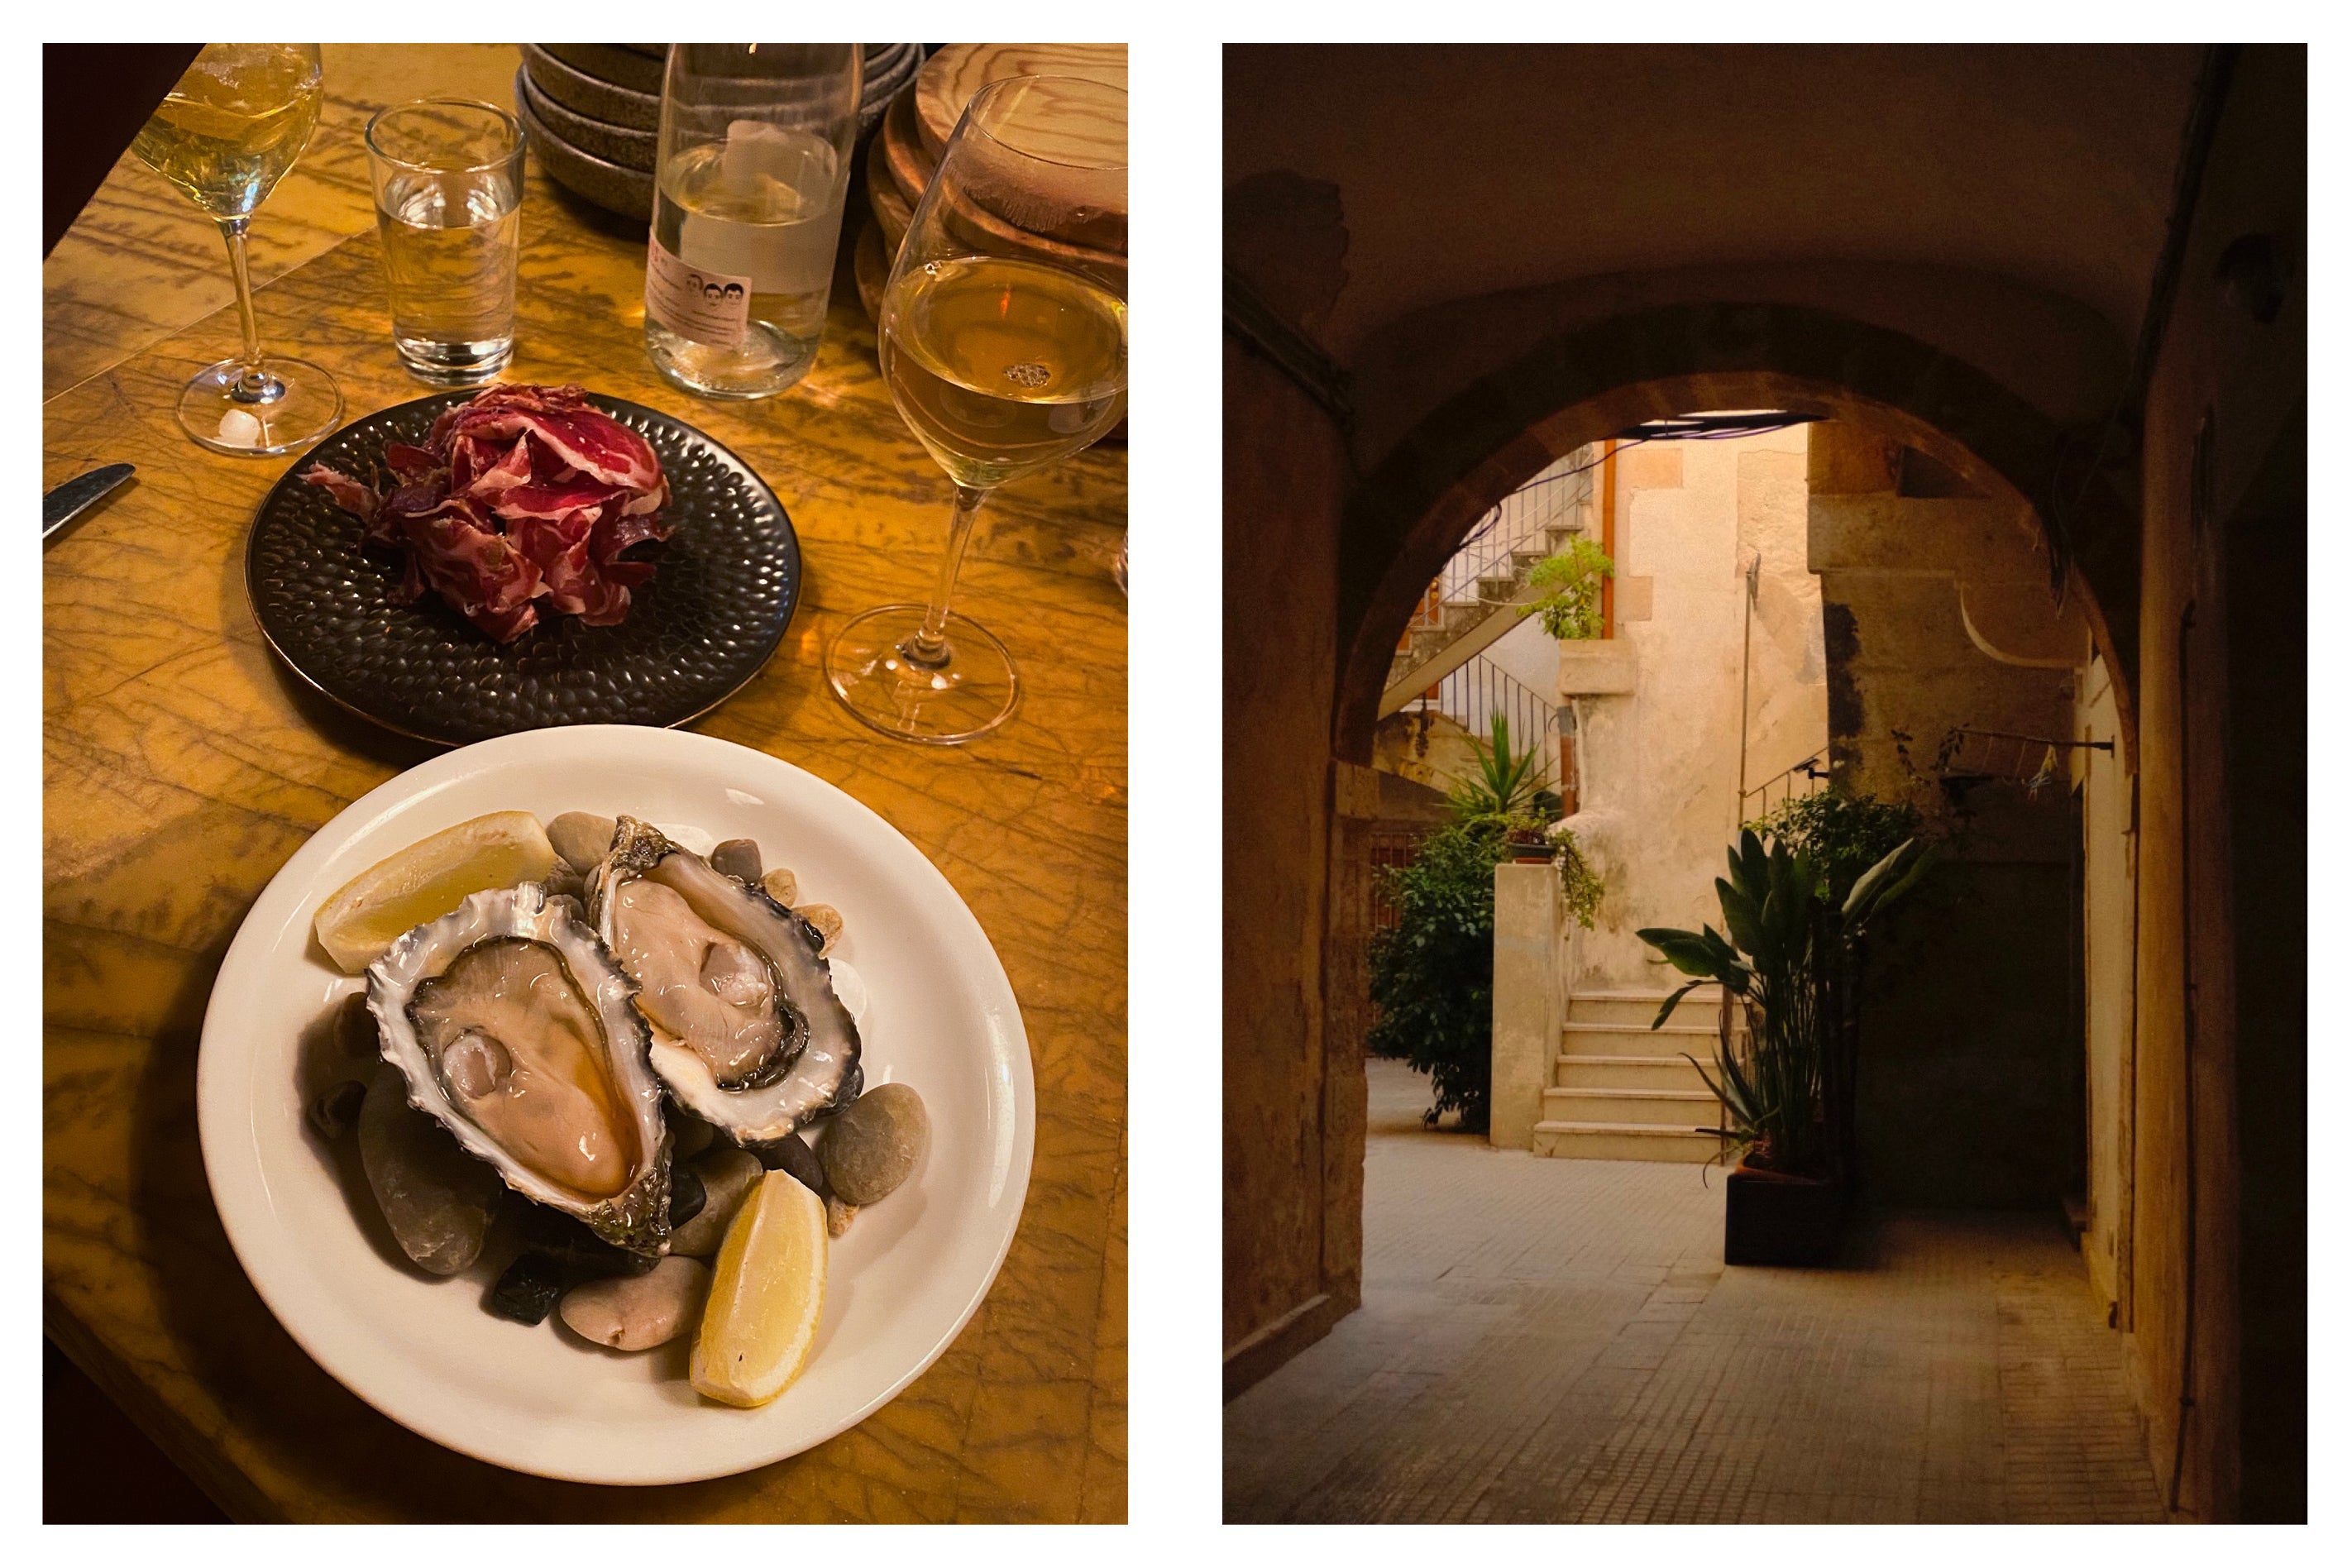 An image of oysters and architecture in Sicily.